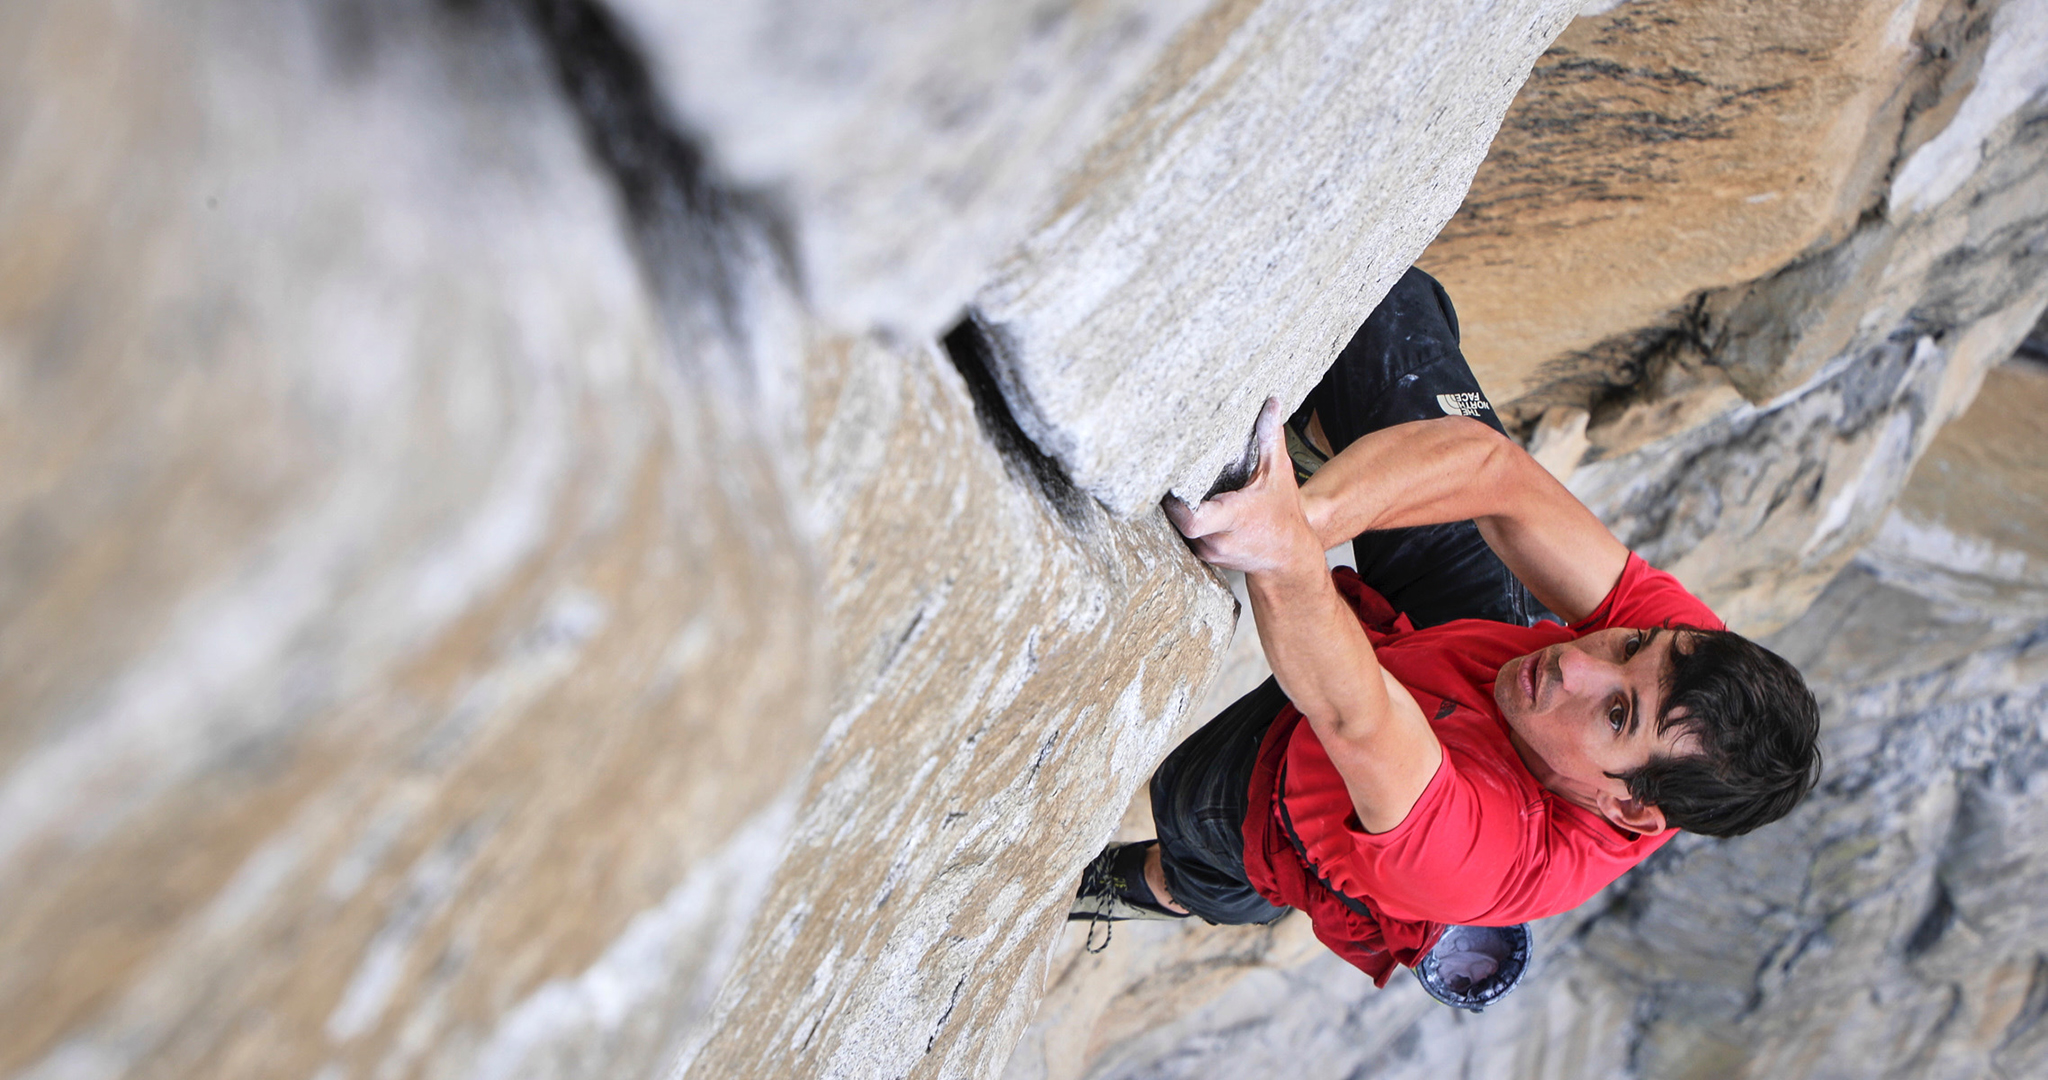 Photos of Free Solo Climber Alex Honnold's Most Epic Routes